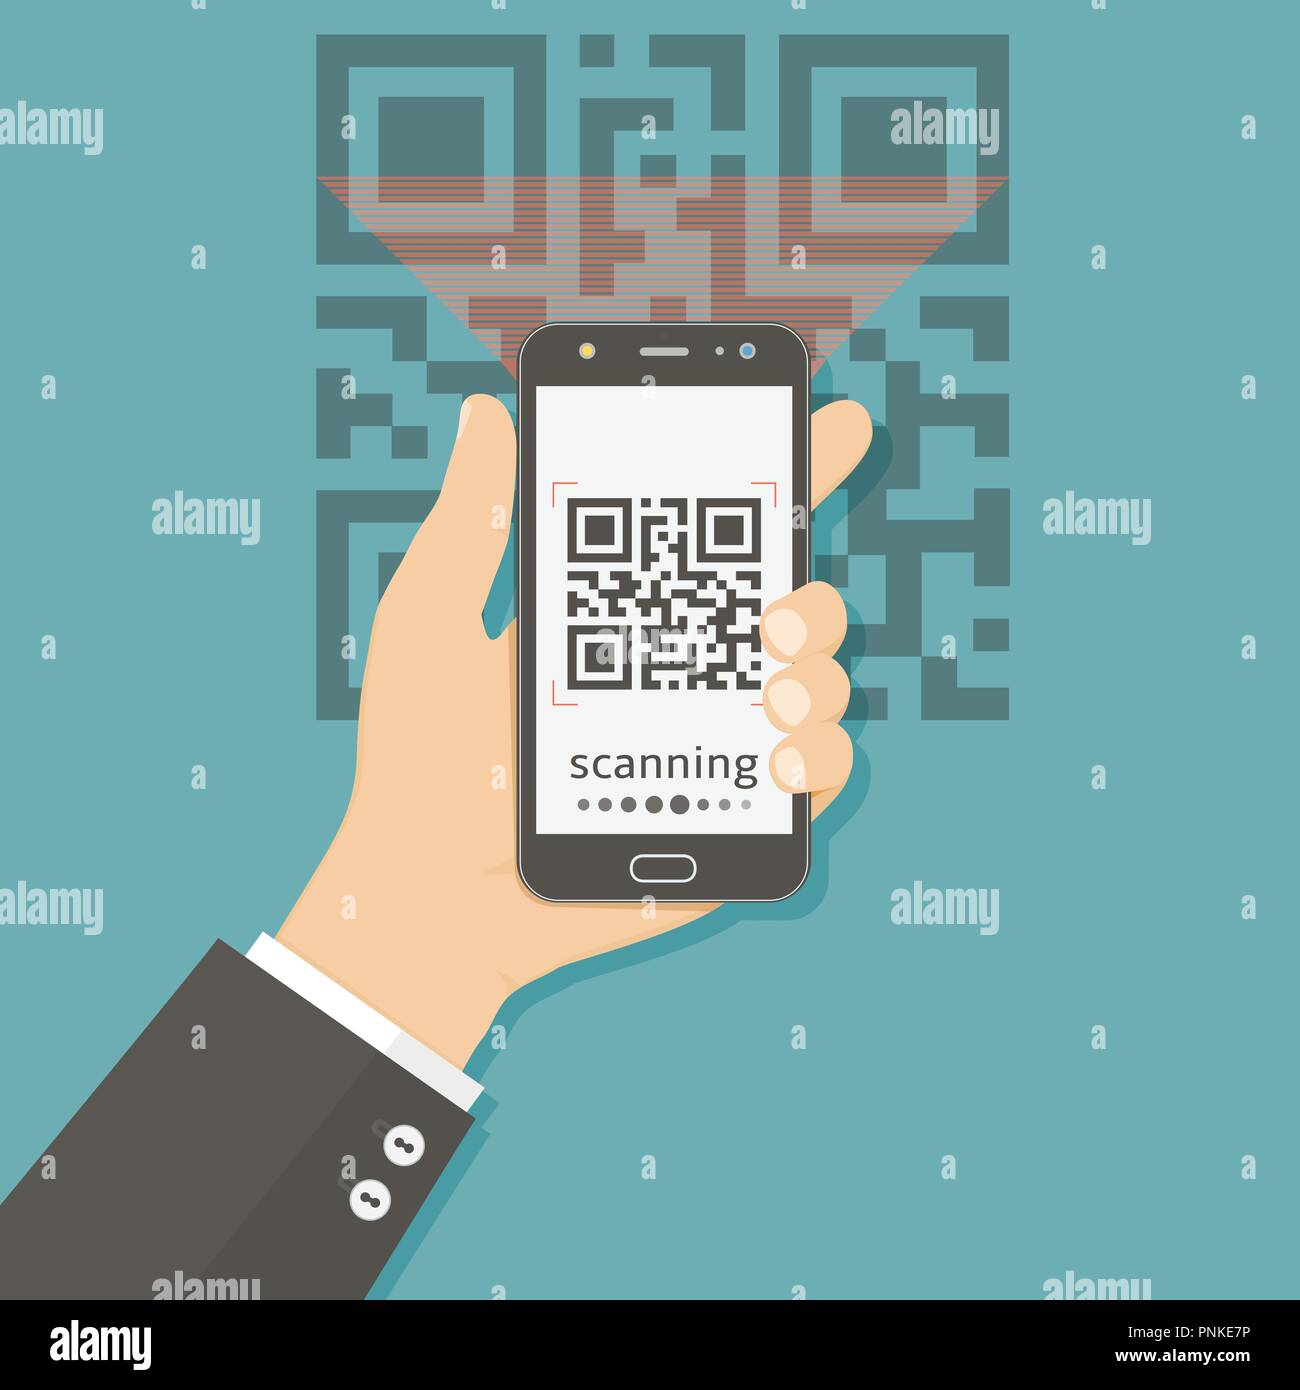 Flat vector illustration concept for scanning QR code with mobile phone Stock Vector